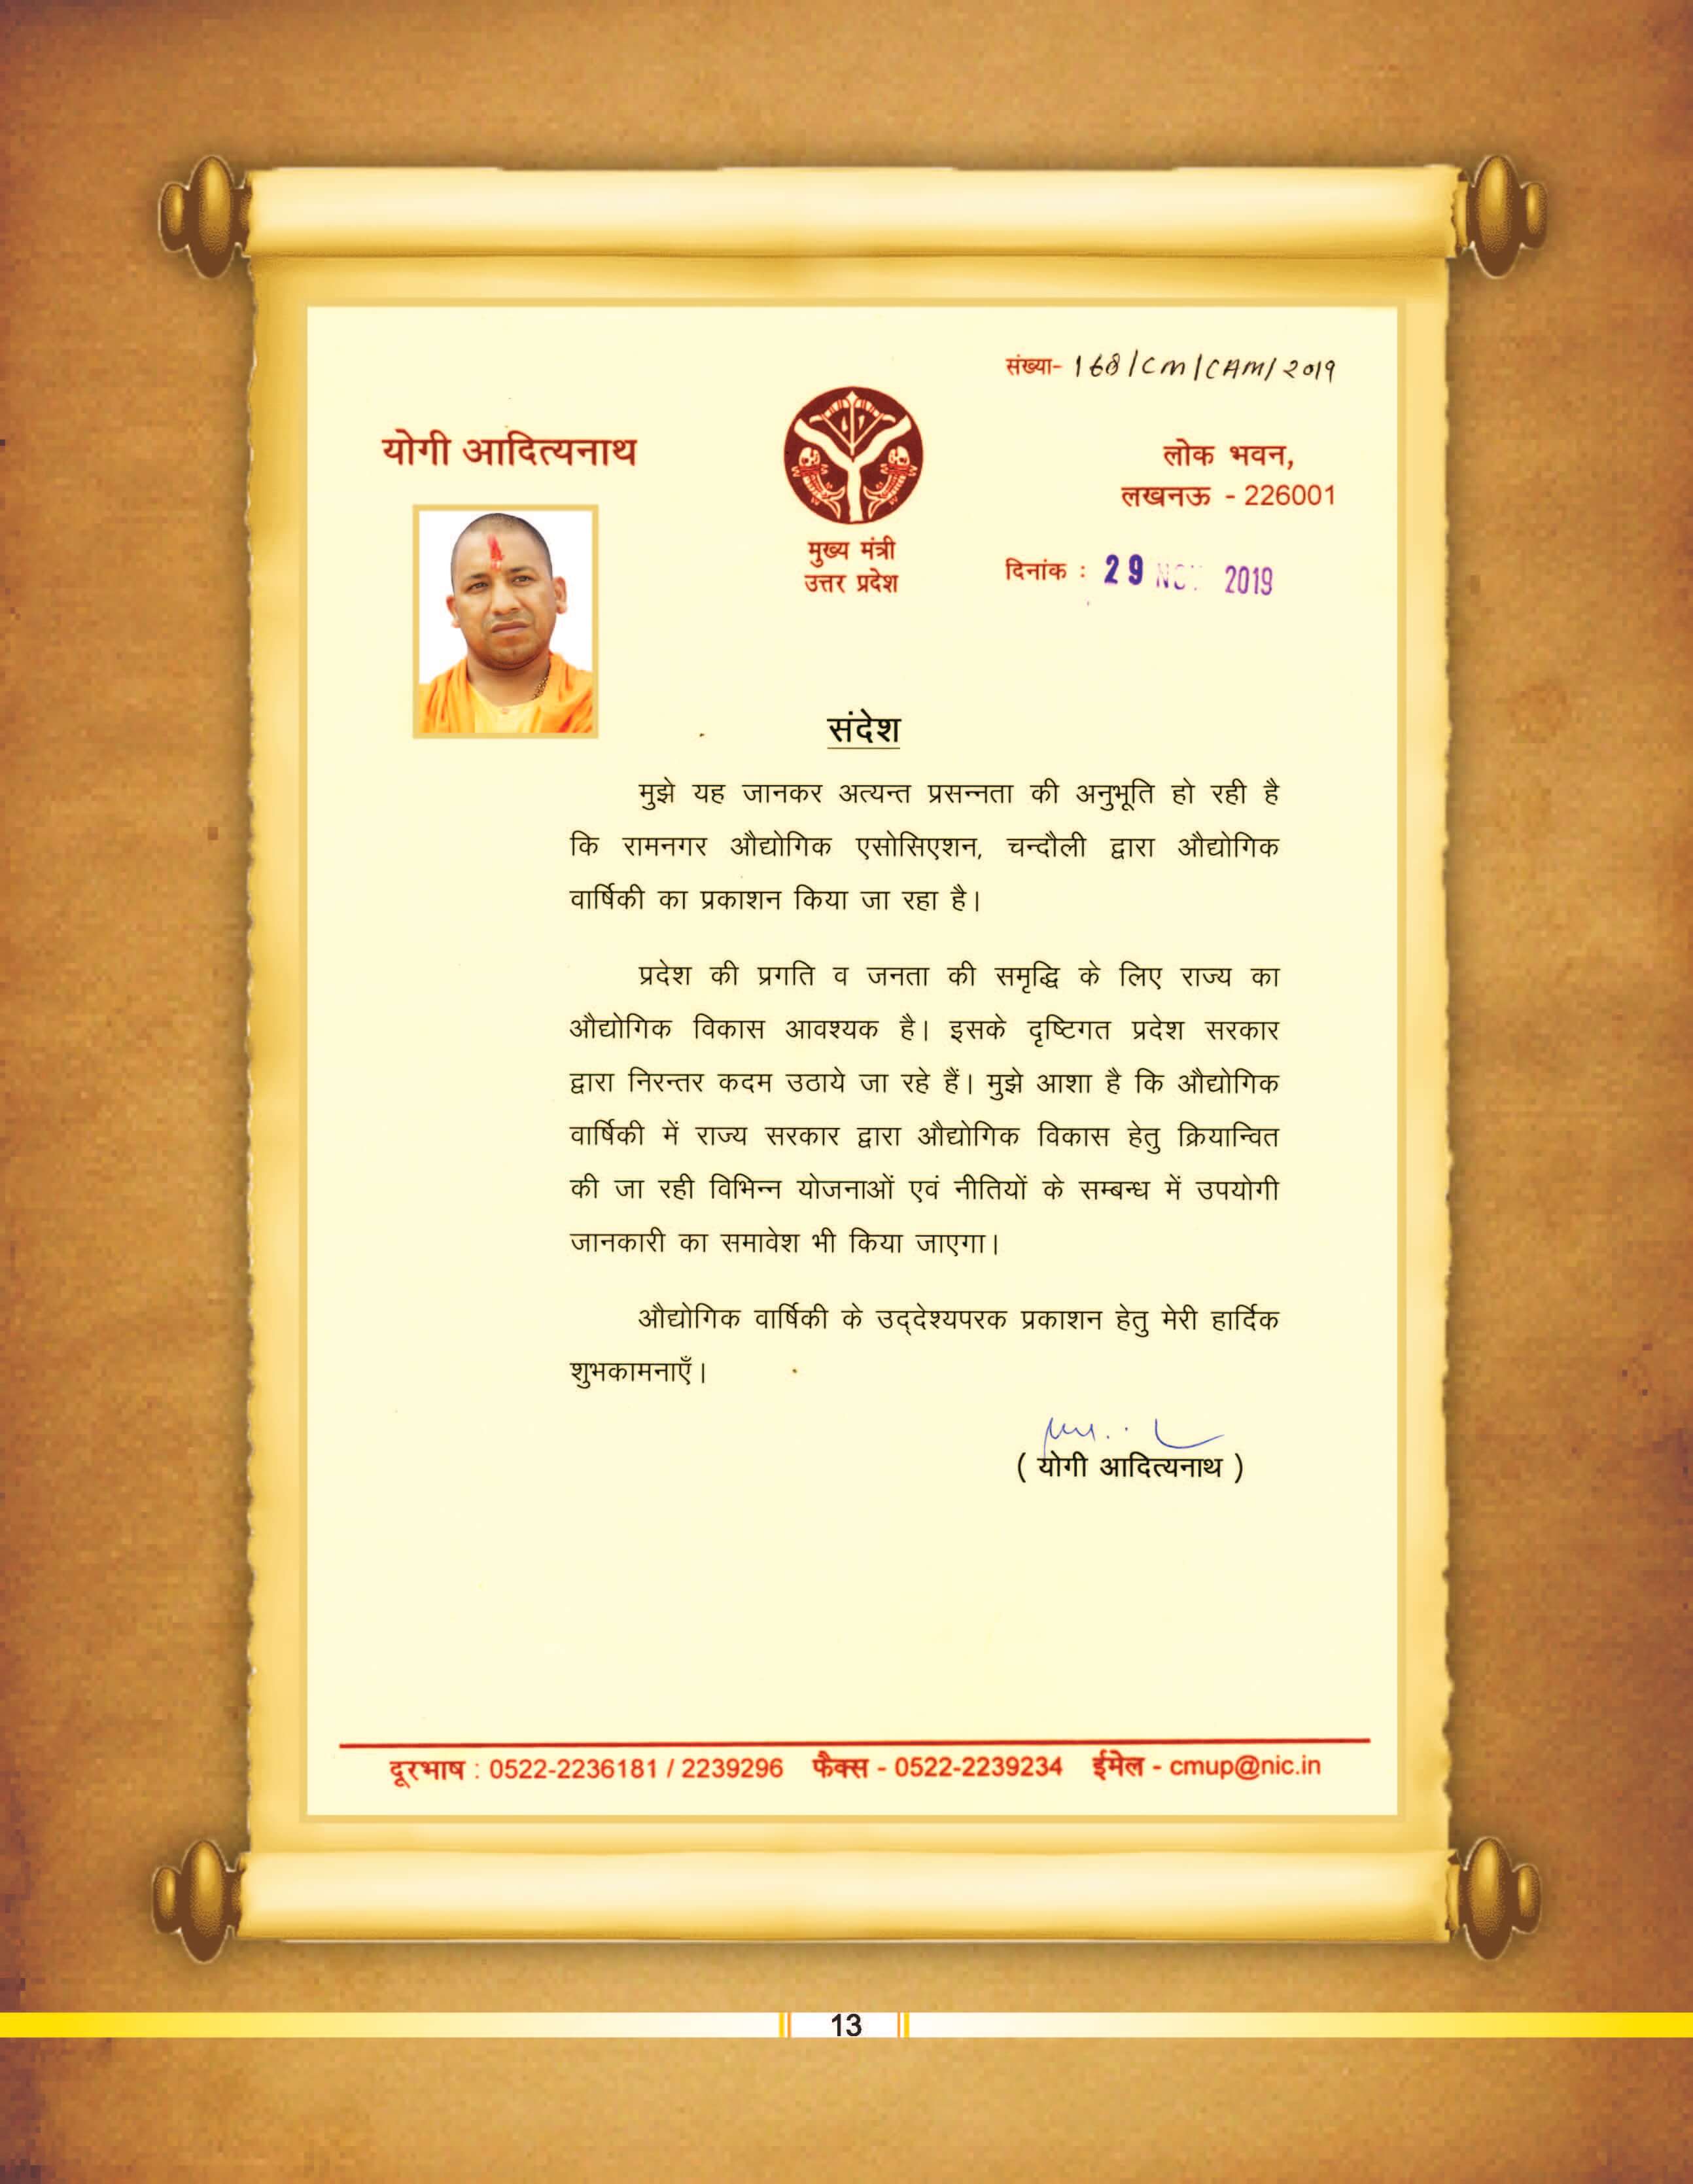 yogi adityanath (Chief Minister of UP) message for ramnagar industrial area